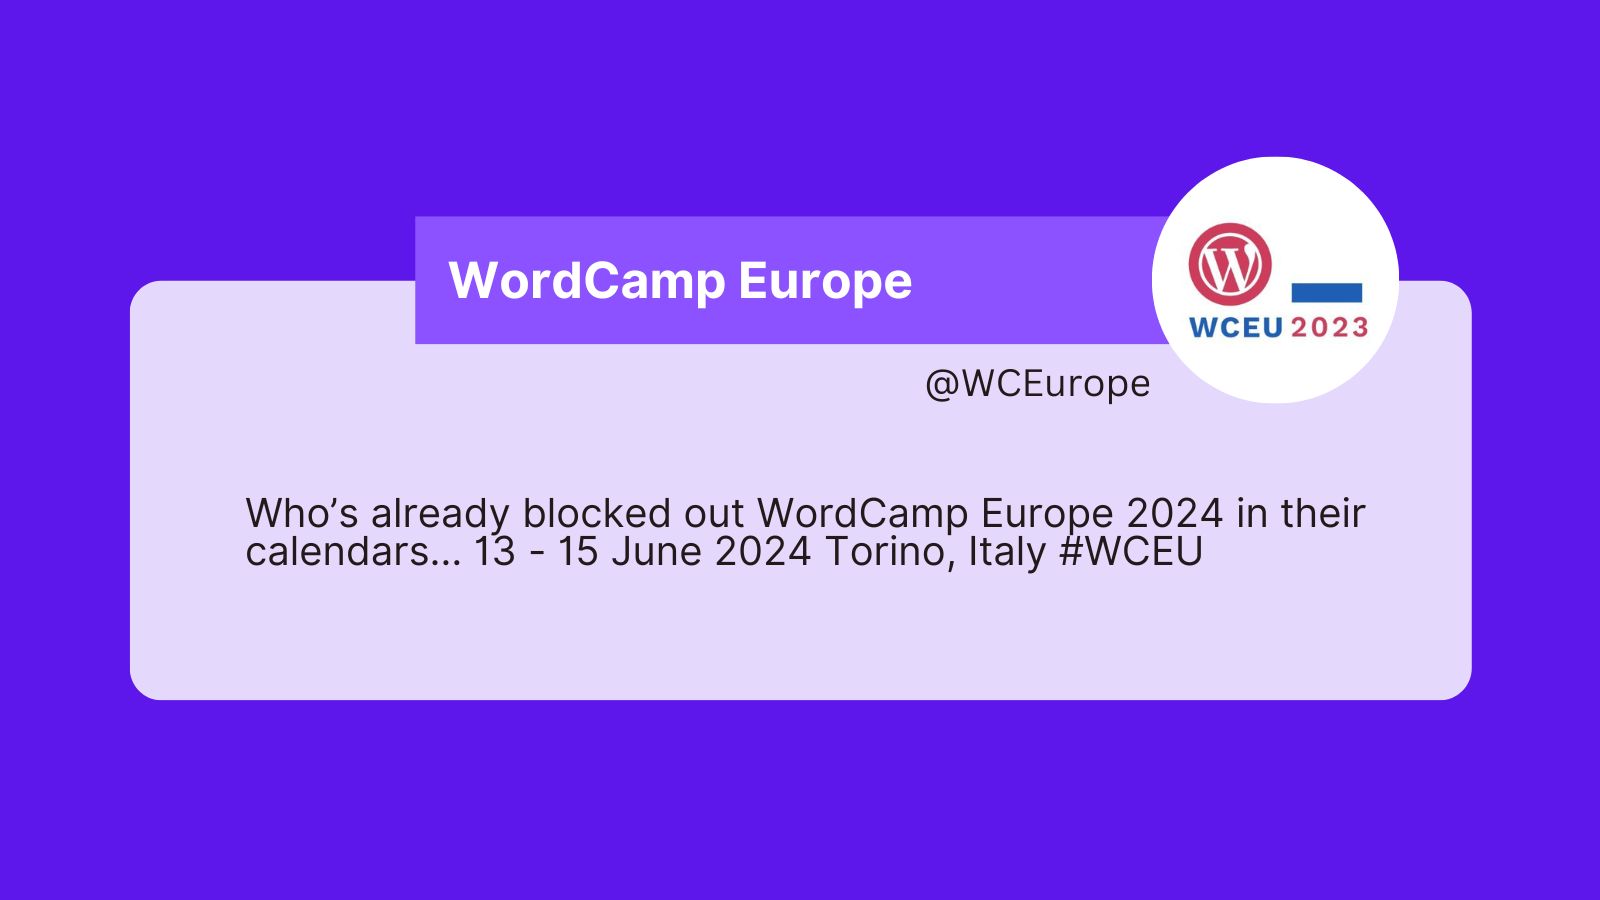 A text that reads: Who’s already blocked out WordCamp Europe 2024 in their calendars… 13 - 15 June 2024 Torino, Italy #WCEU